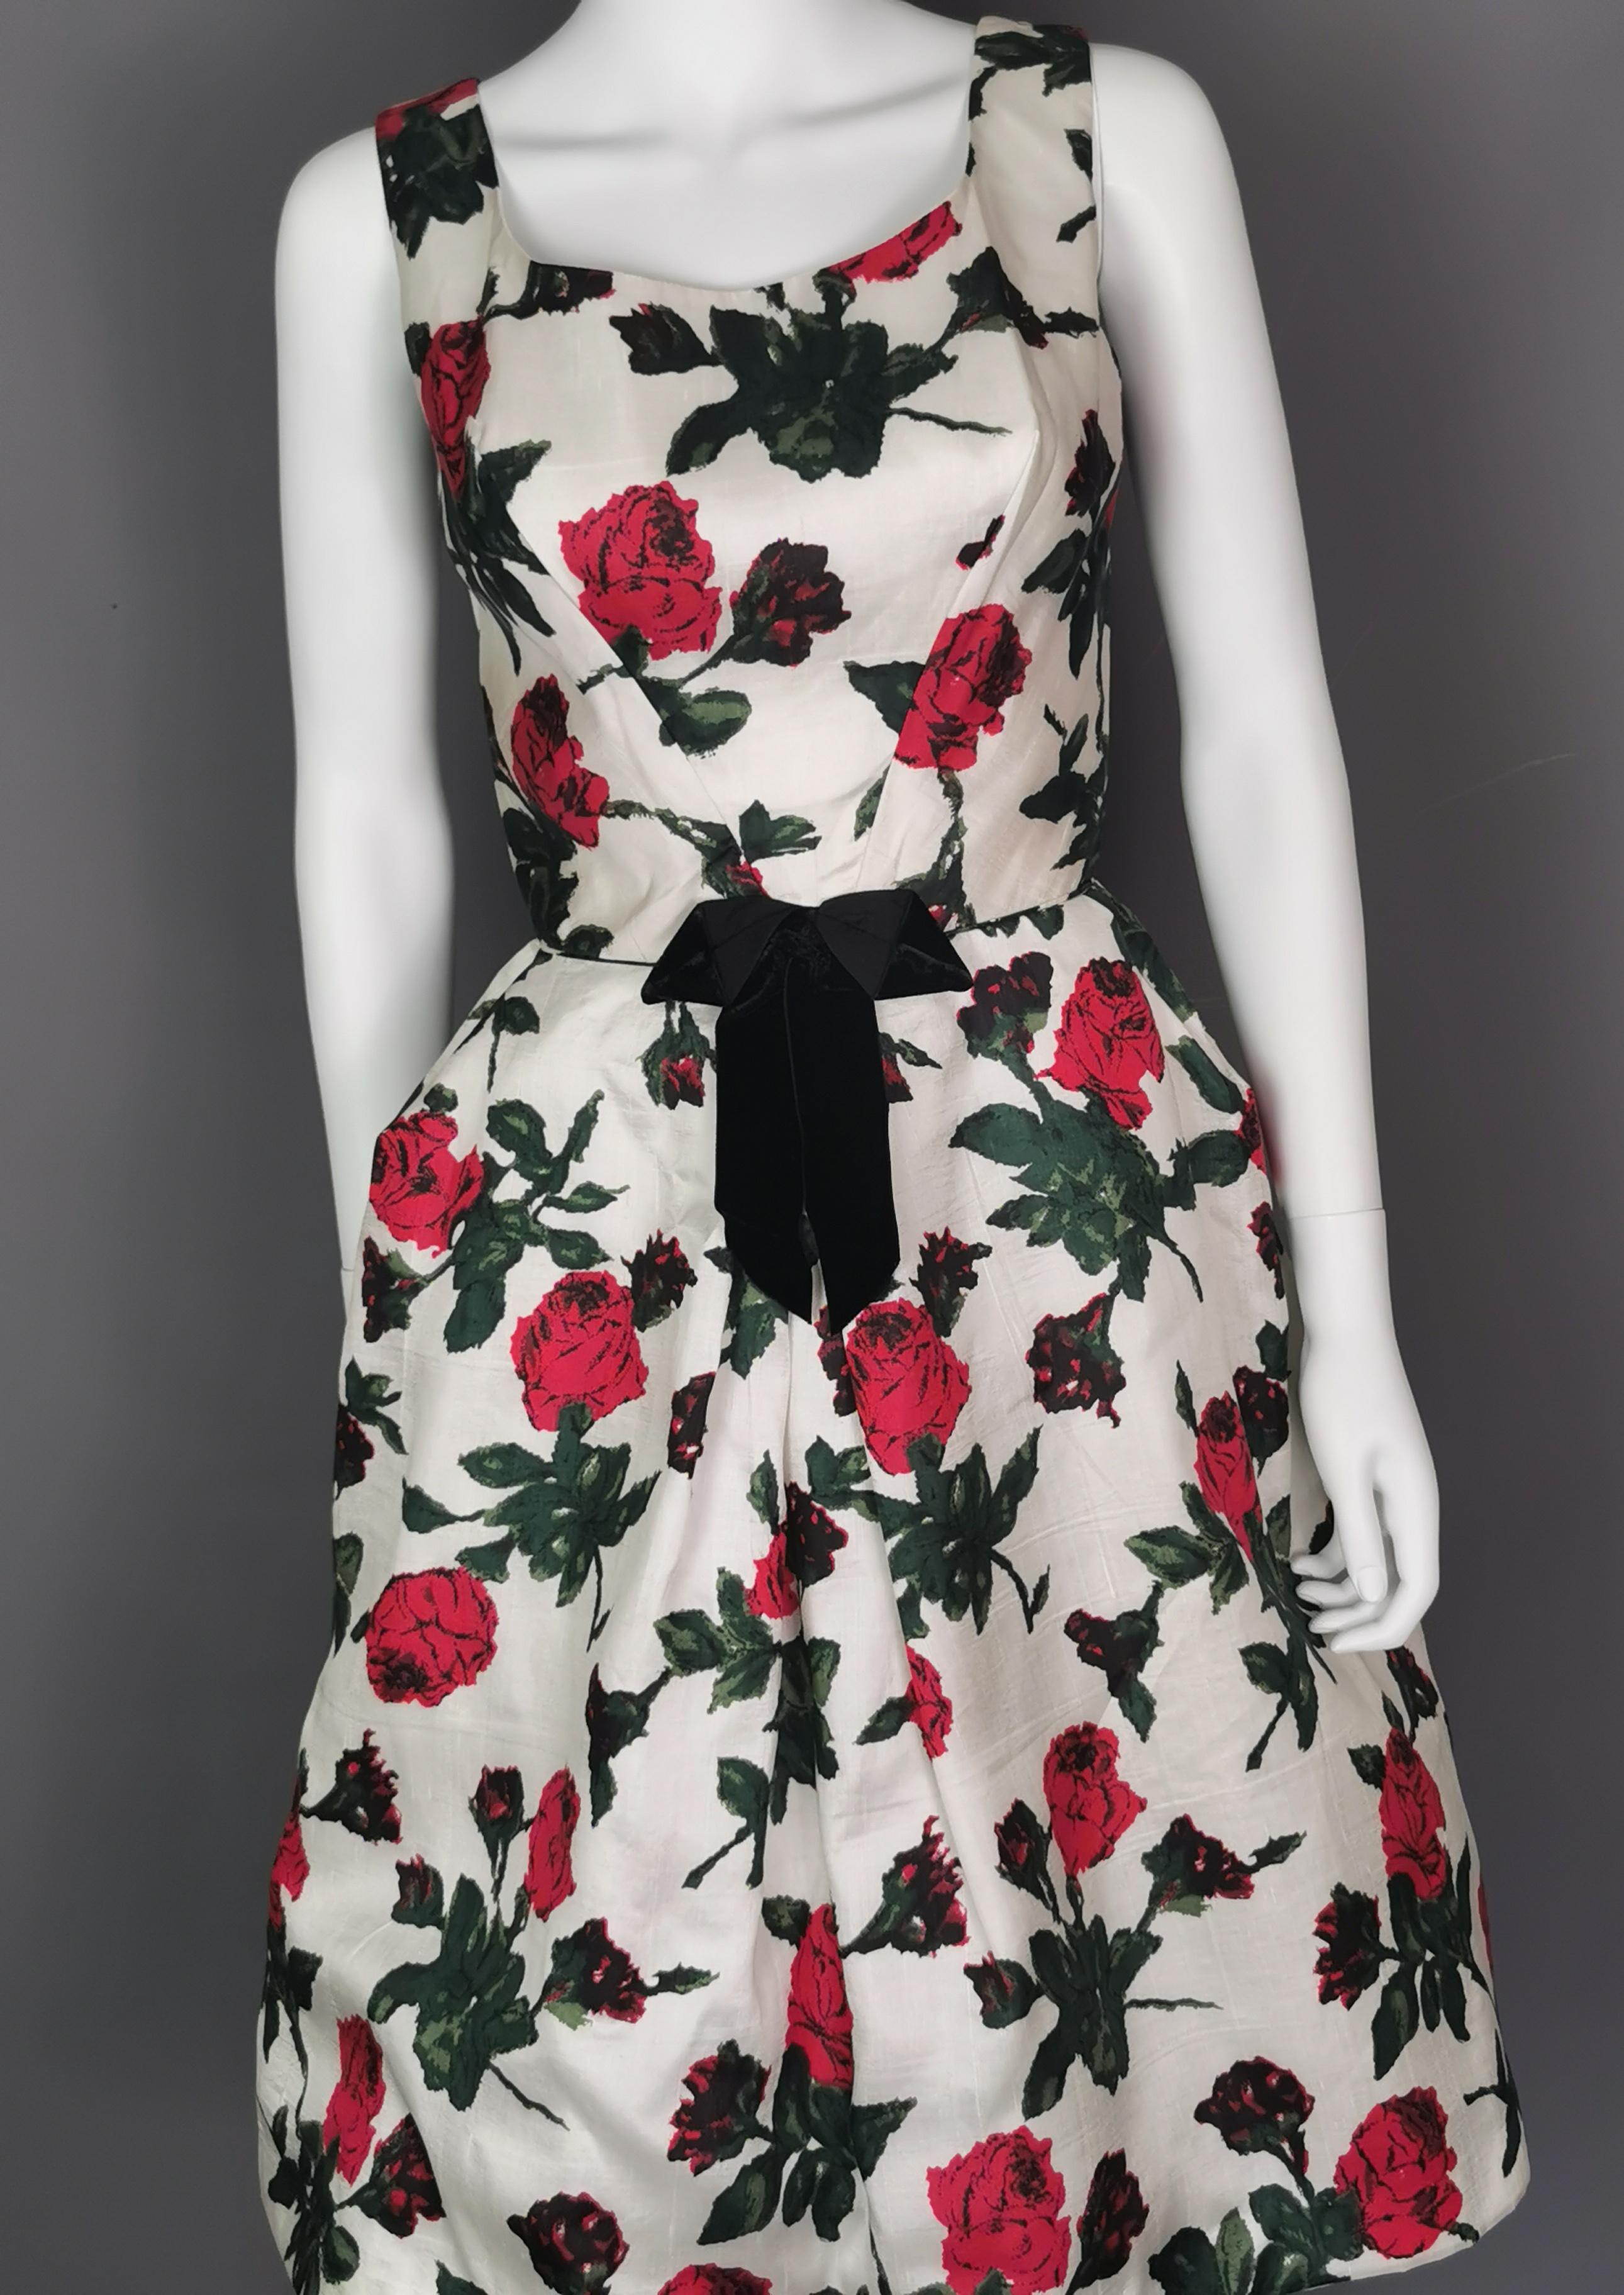 A gorgeous vintage c1950s floral dress.

It is made from silk with a white ground and has an all over Rose print in red and green with black accents.

The dress is fully lined and has a full skirt and fitted bodice, it is sleeveless and has a small